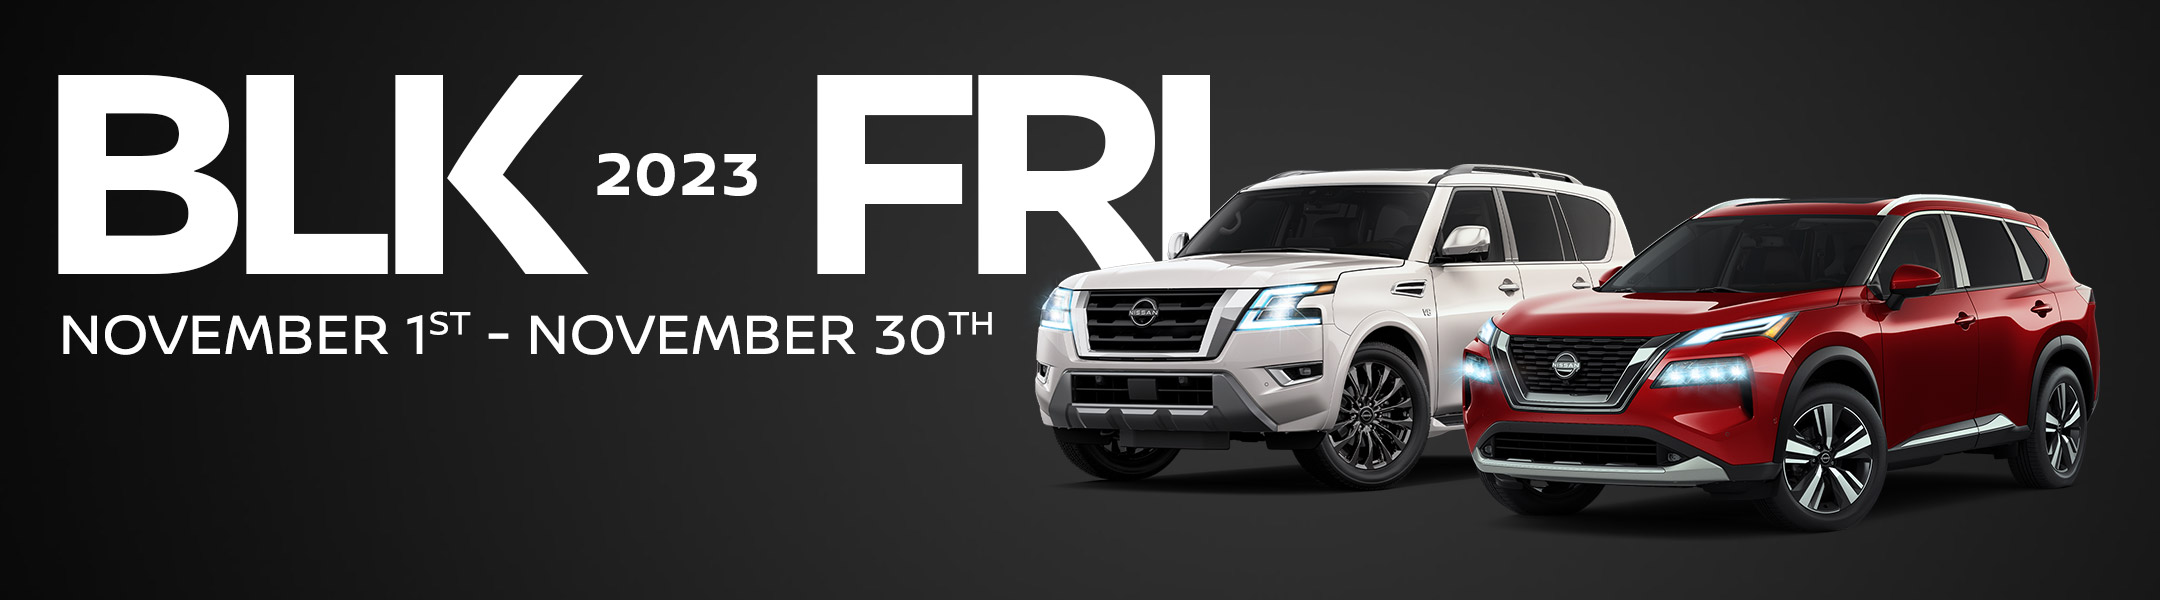 Black Friday - Avenue Nissan Special Offers | Toronto, ON